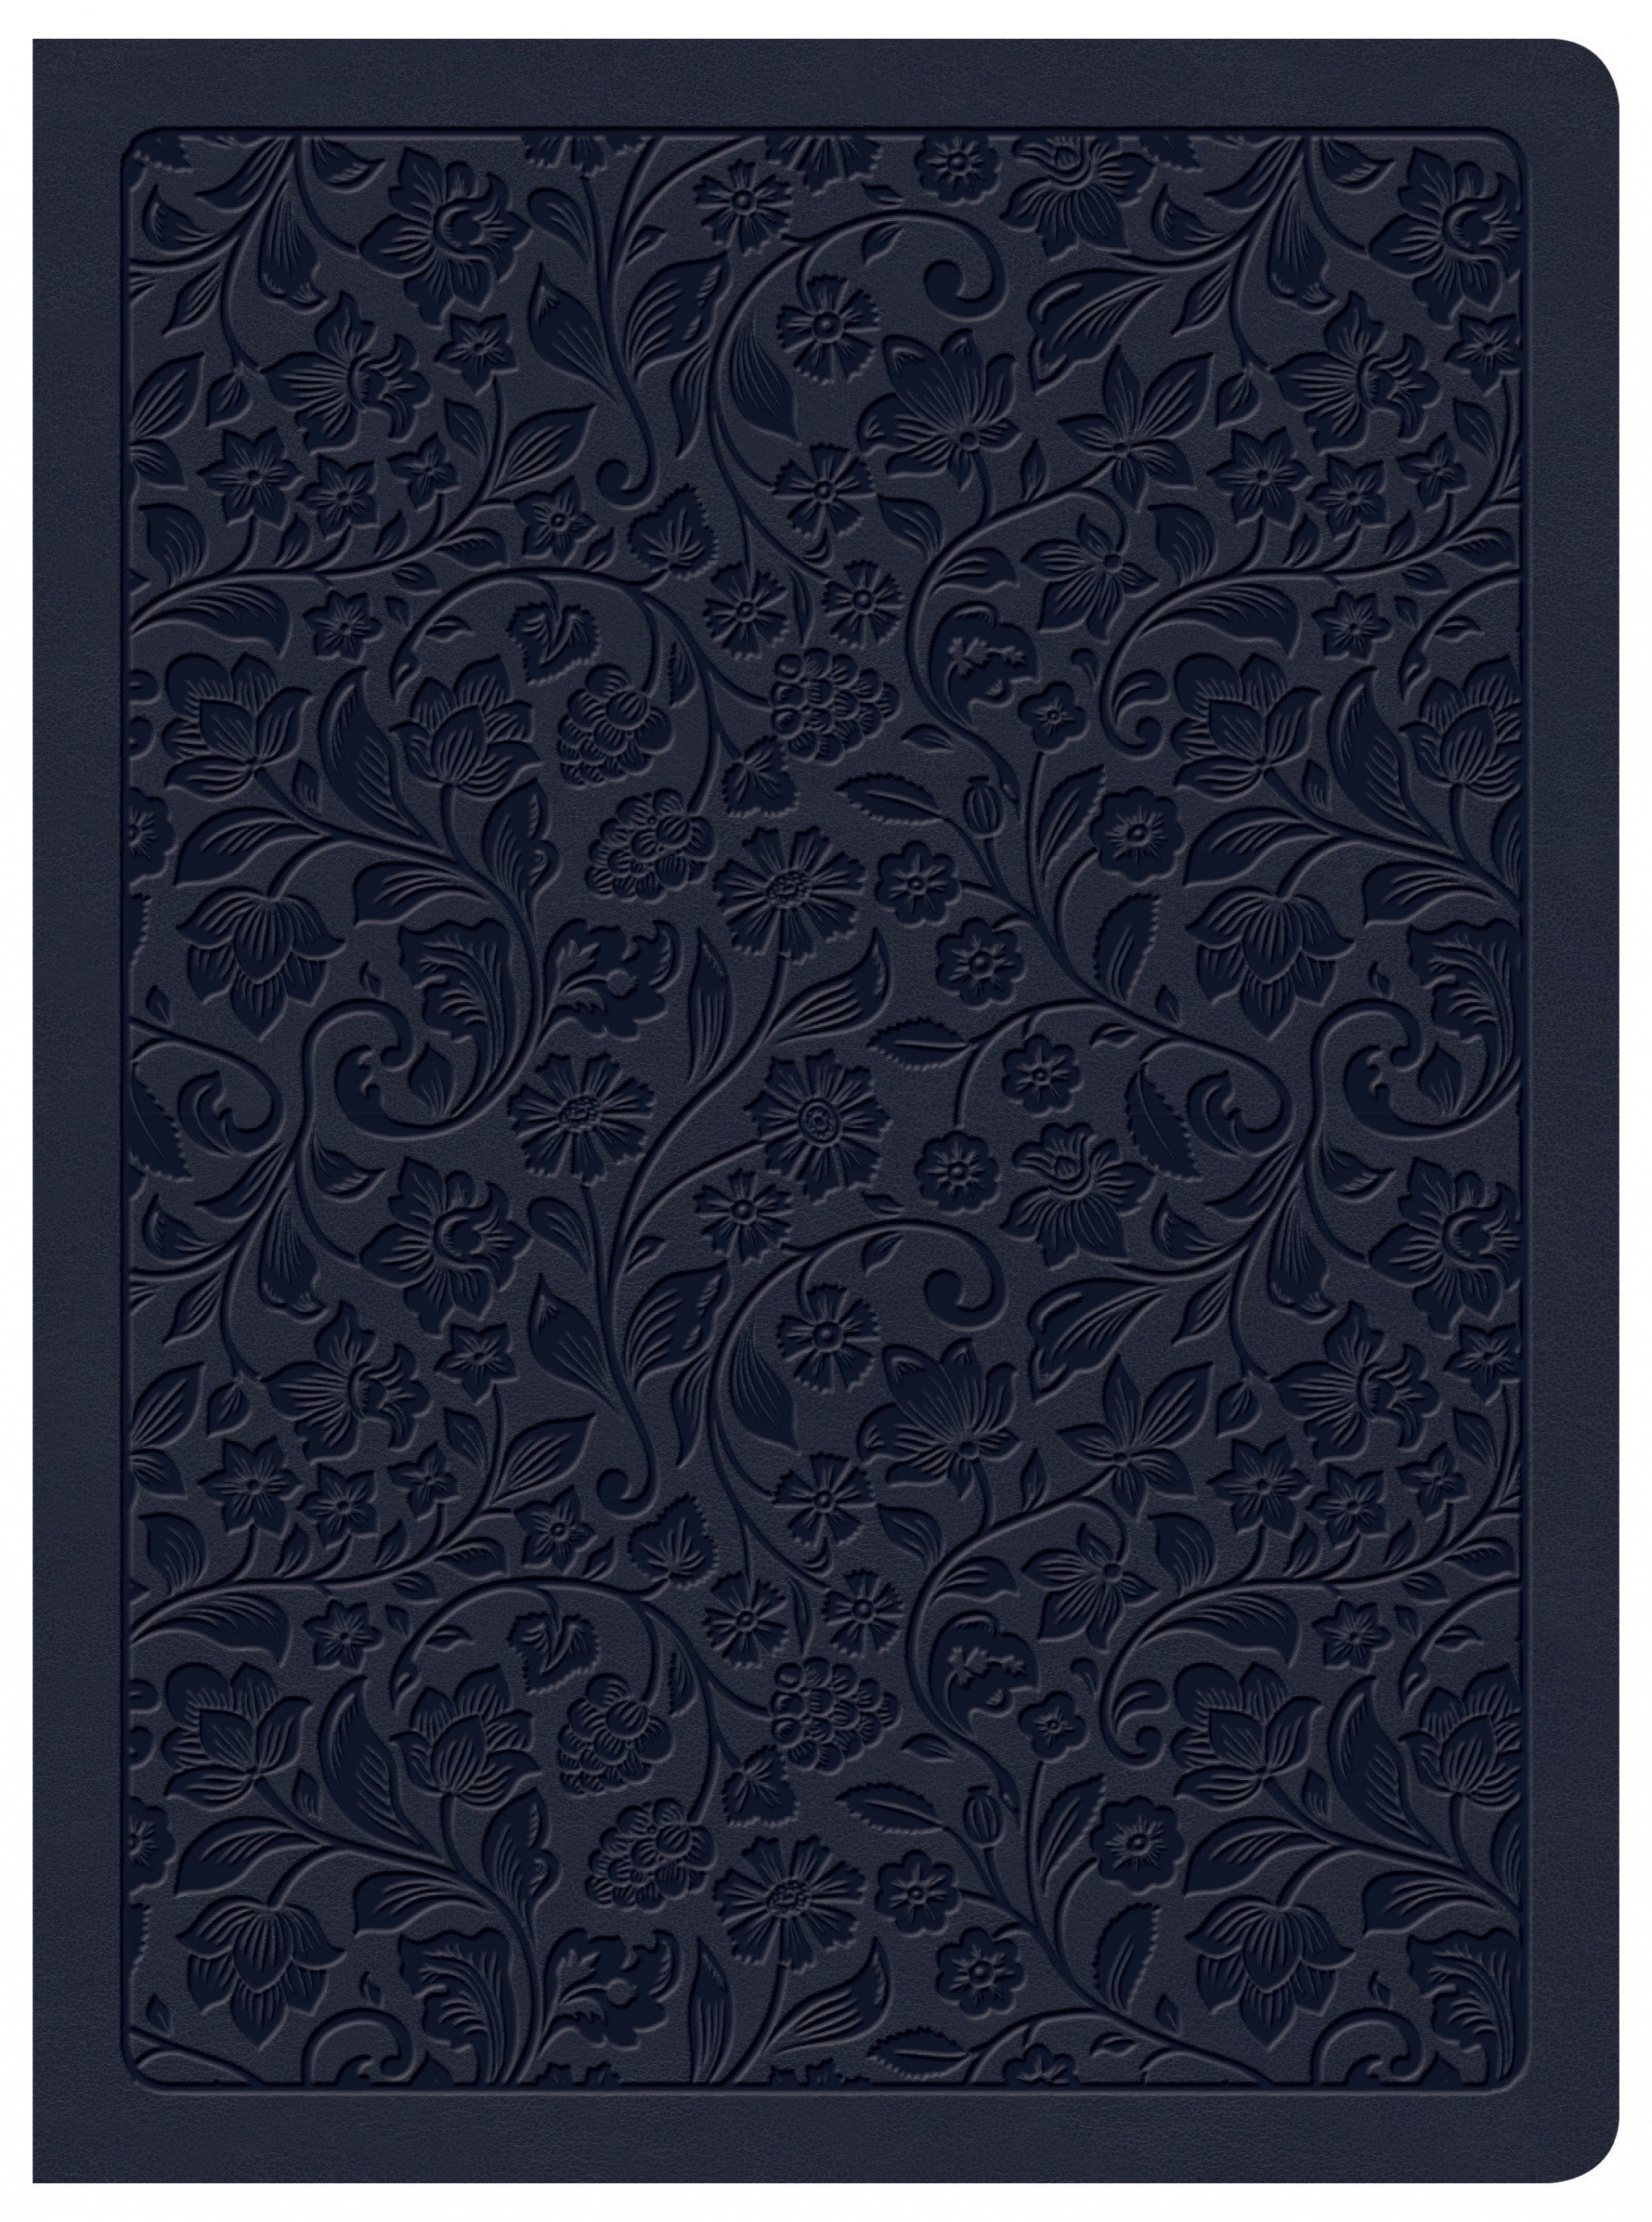 Image of CSB Life Connections Study Bible, Navy LeatherTouch other